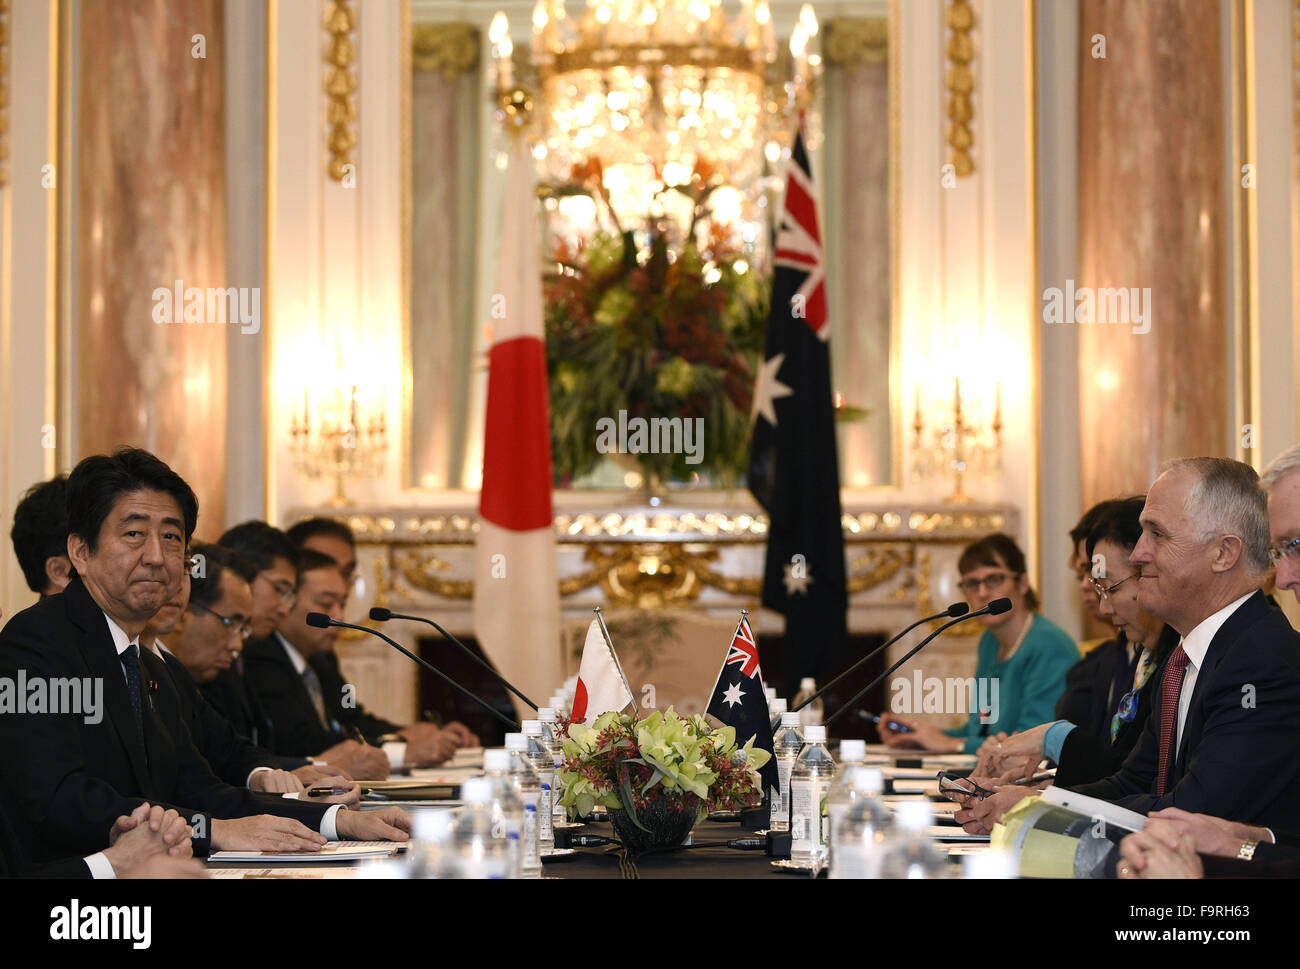 Tokyo. 18th Dec, 2015. Japan's Prime Minister Shinzo Abe (1st L) meets with his Australian counterpart Malcolm Turnbull (1st R) at Akasaka hotel in Tokyo, Japan, Dec. 18, 2015. © Xinhua/Alamy Live News Stock Photo